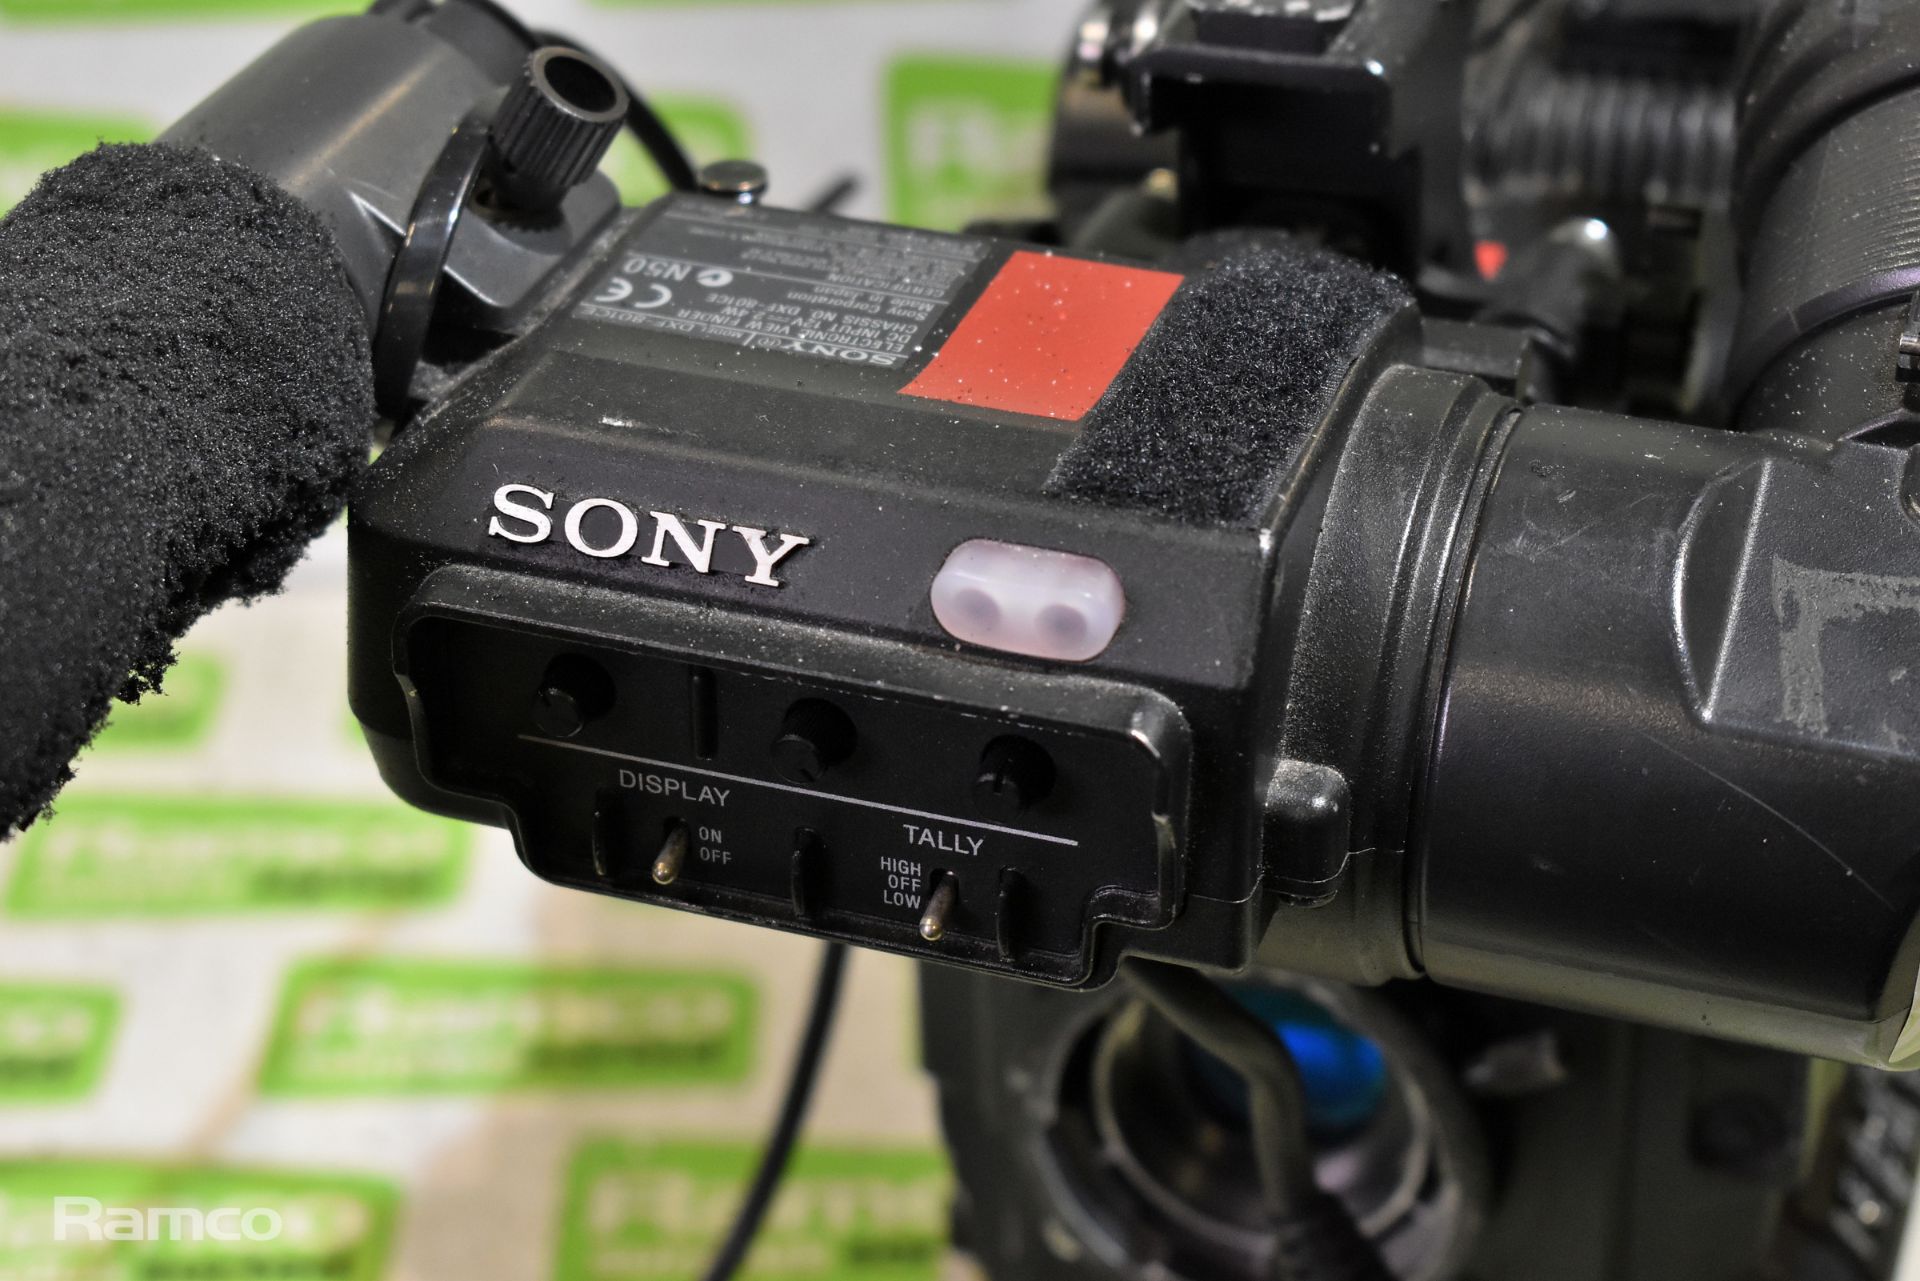 Sony DSR-450WSP digital camcorder with sony DXF-801CE viewfinder - NO LENS - Image 12 of 14